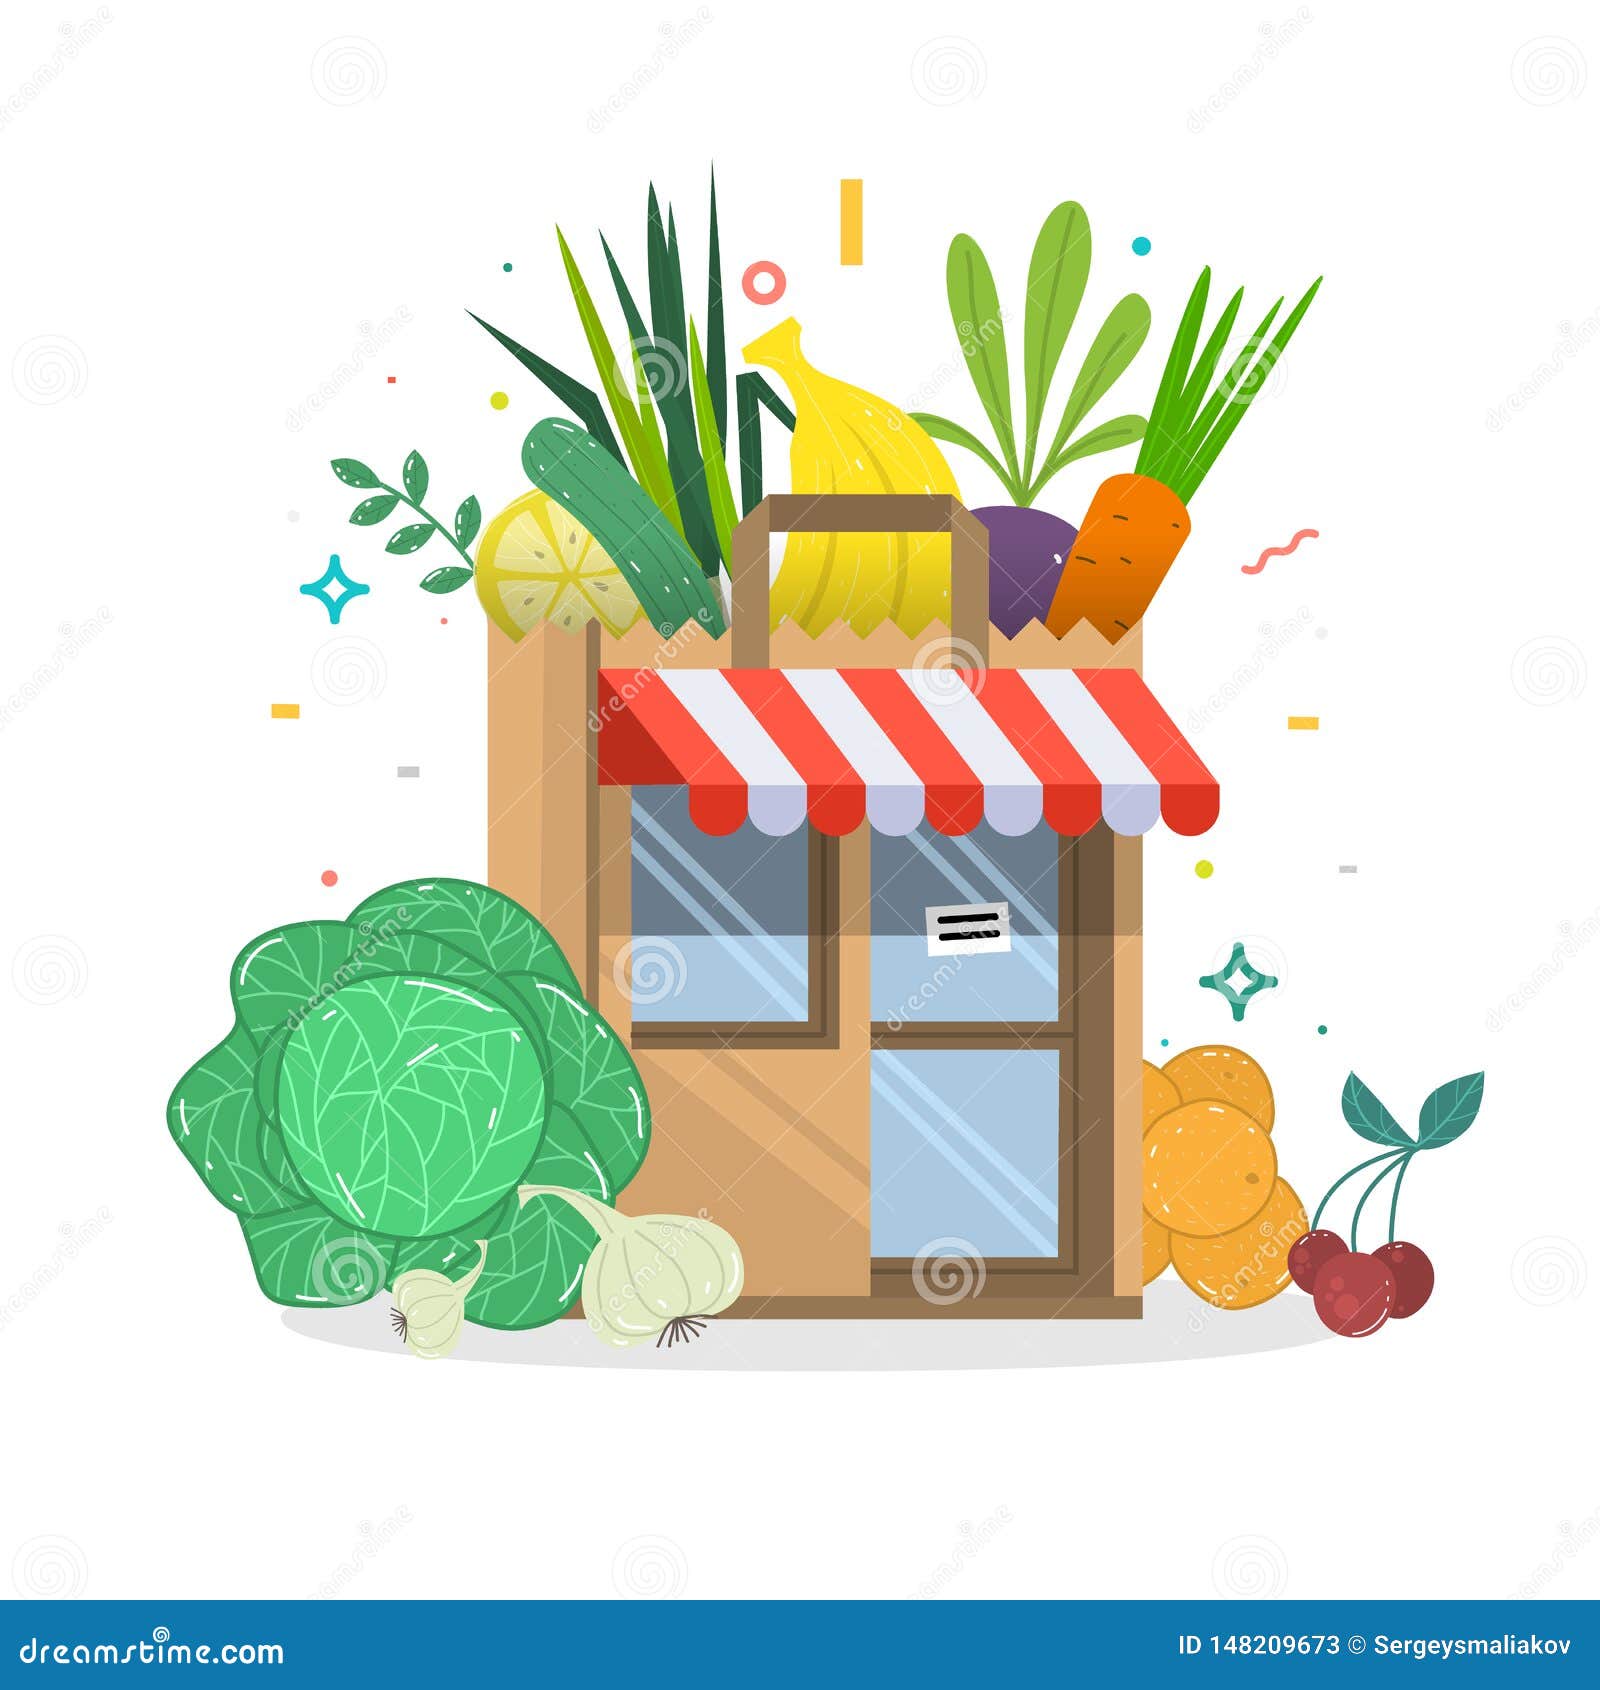 Local Fruit and Vegetables Store Building. Groceries Crates in